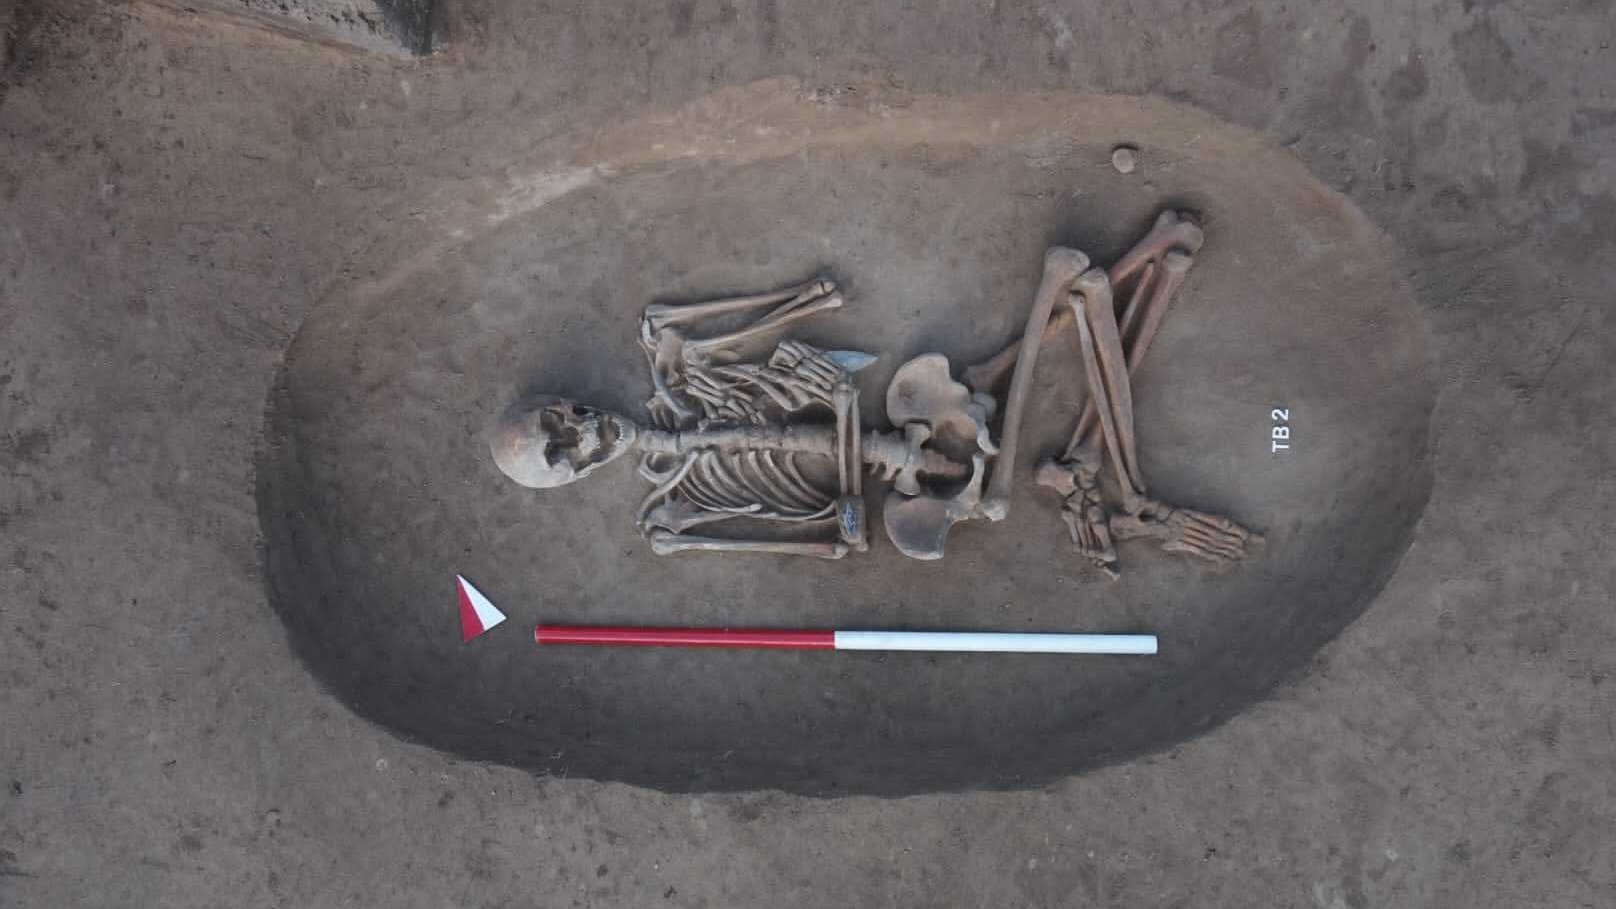  Copper Age necropolis unearthed in Italy contains skeletal remains and still-sharp weapons, maybe from ancient warriors 